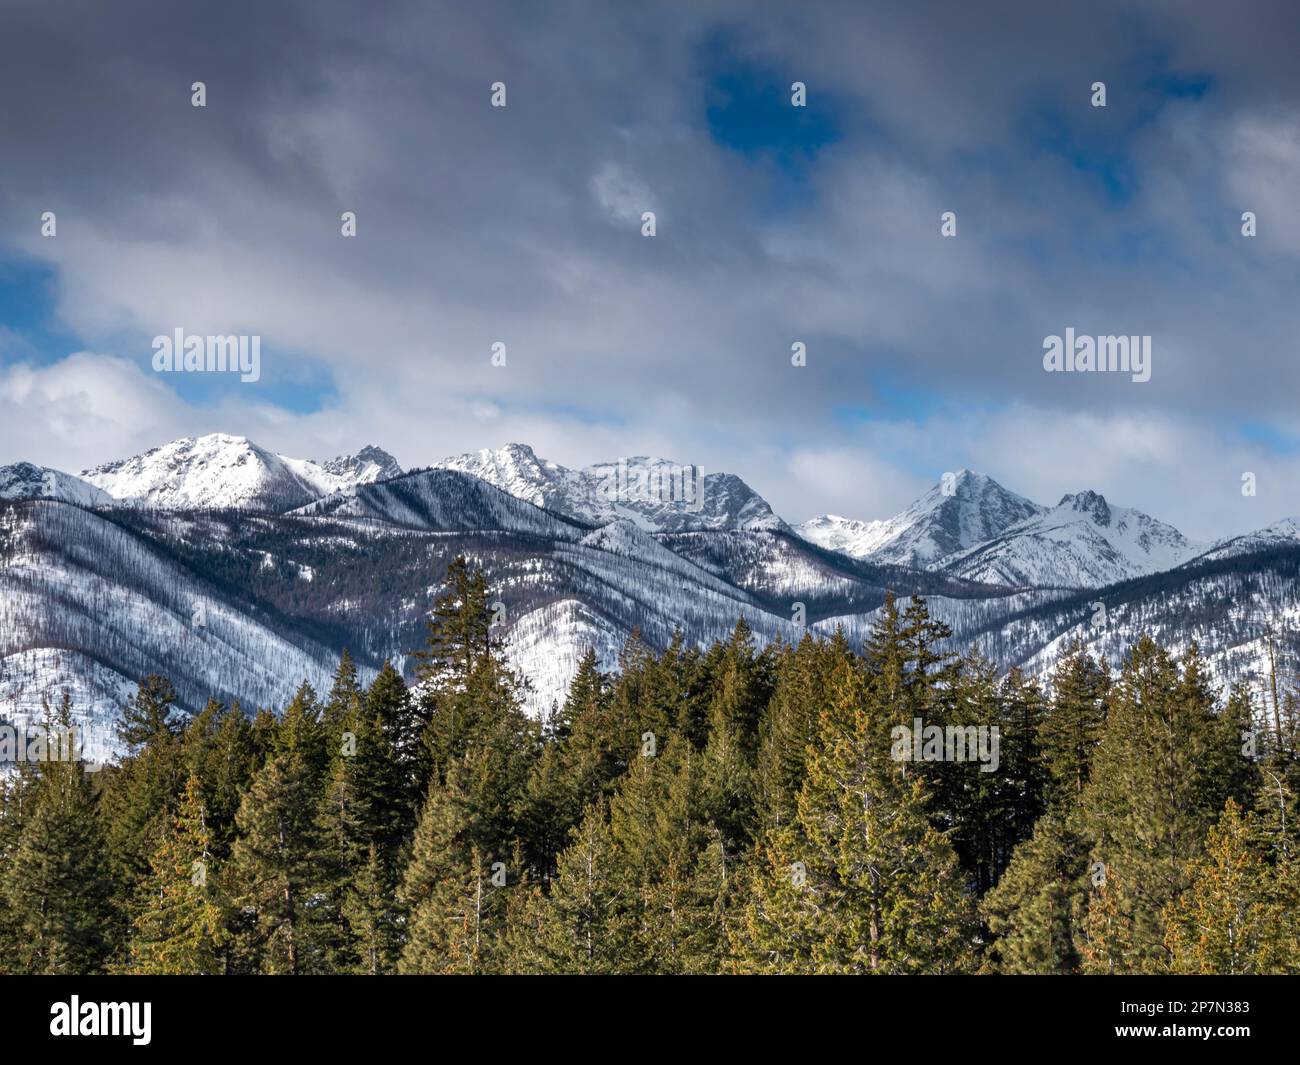 WA23231-00...WASHINGTON - View of the North Cascades from the Lower Fawn Creek cross-country ski trail, in the Rendezvous Trail system in the Methow V Stock Photo